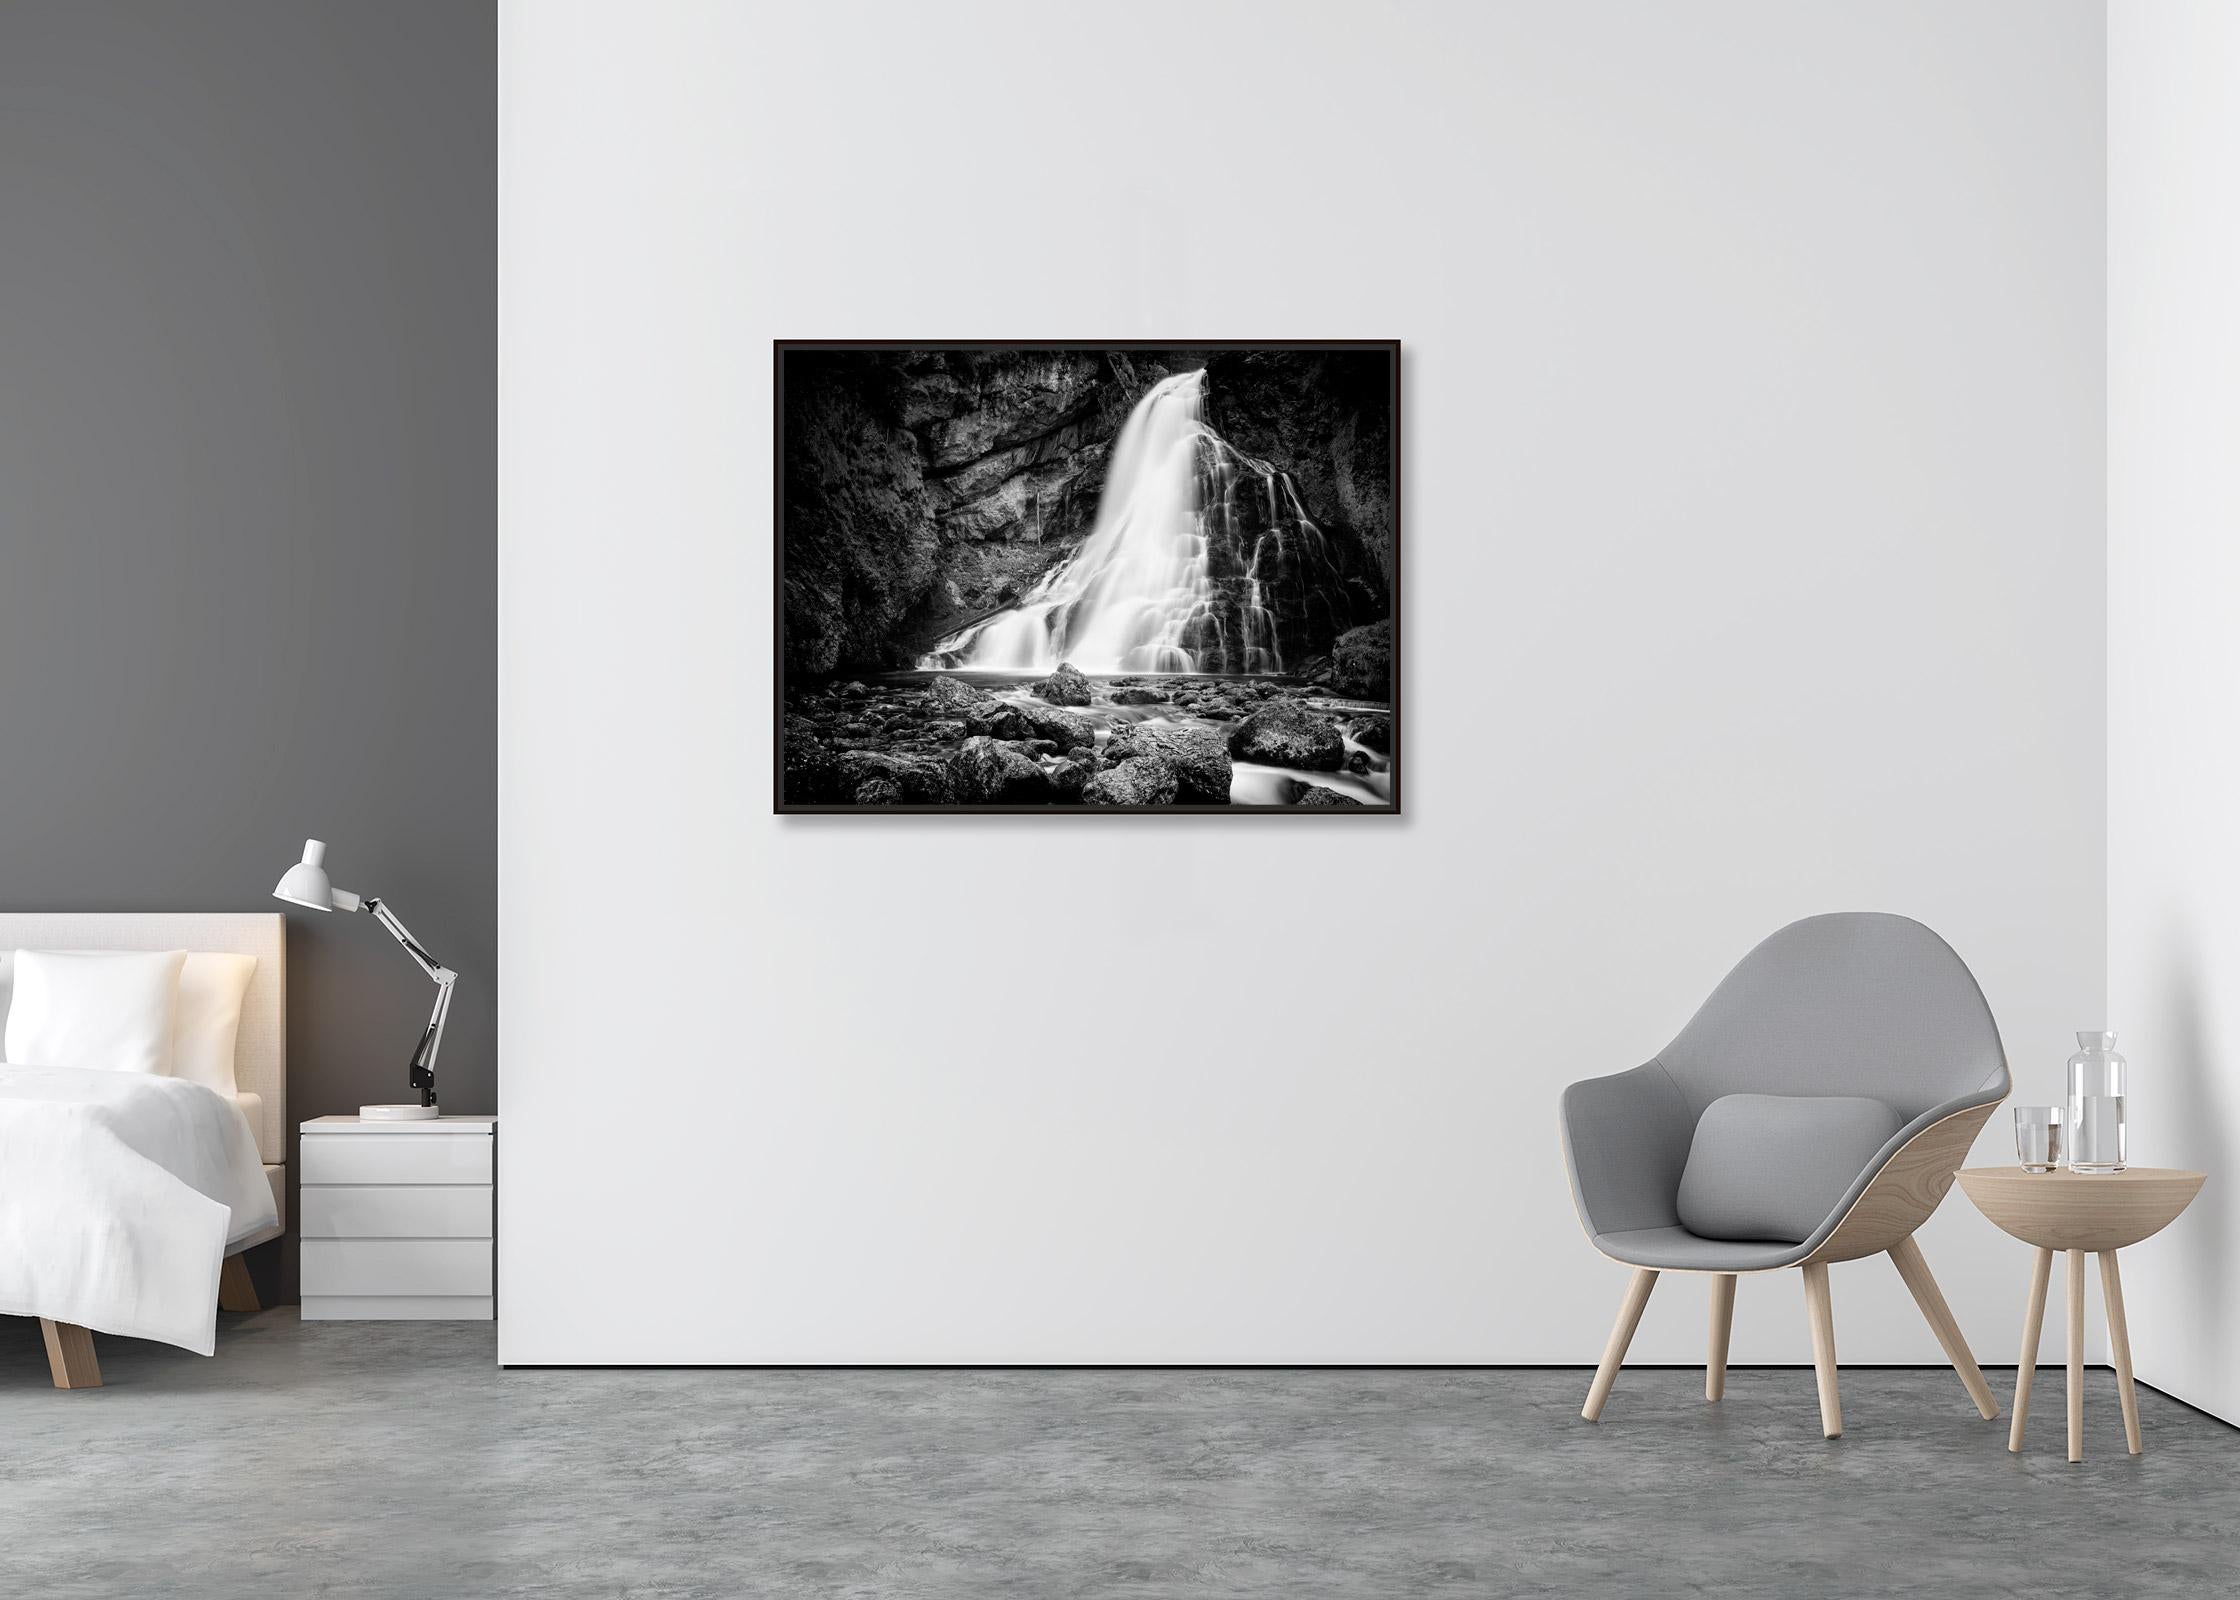 Golling Falls, mountain waterfall, black and white landscape fineart photography - Contemporary Photograph by Gerald Berghammer